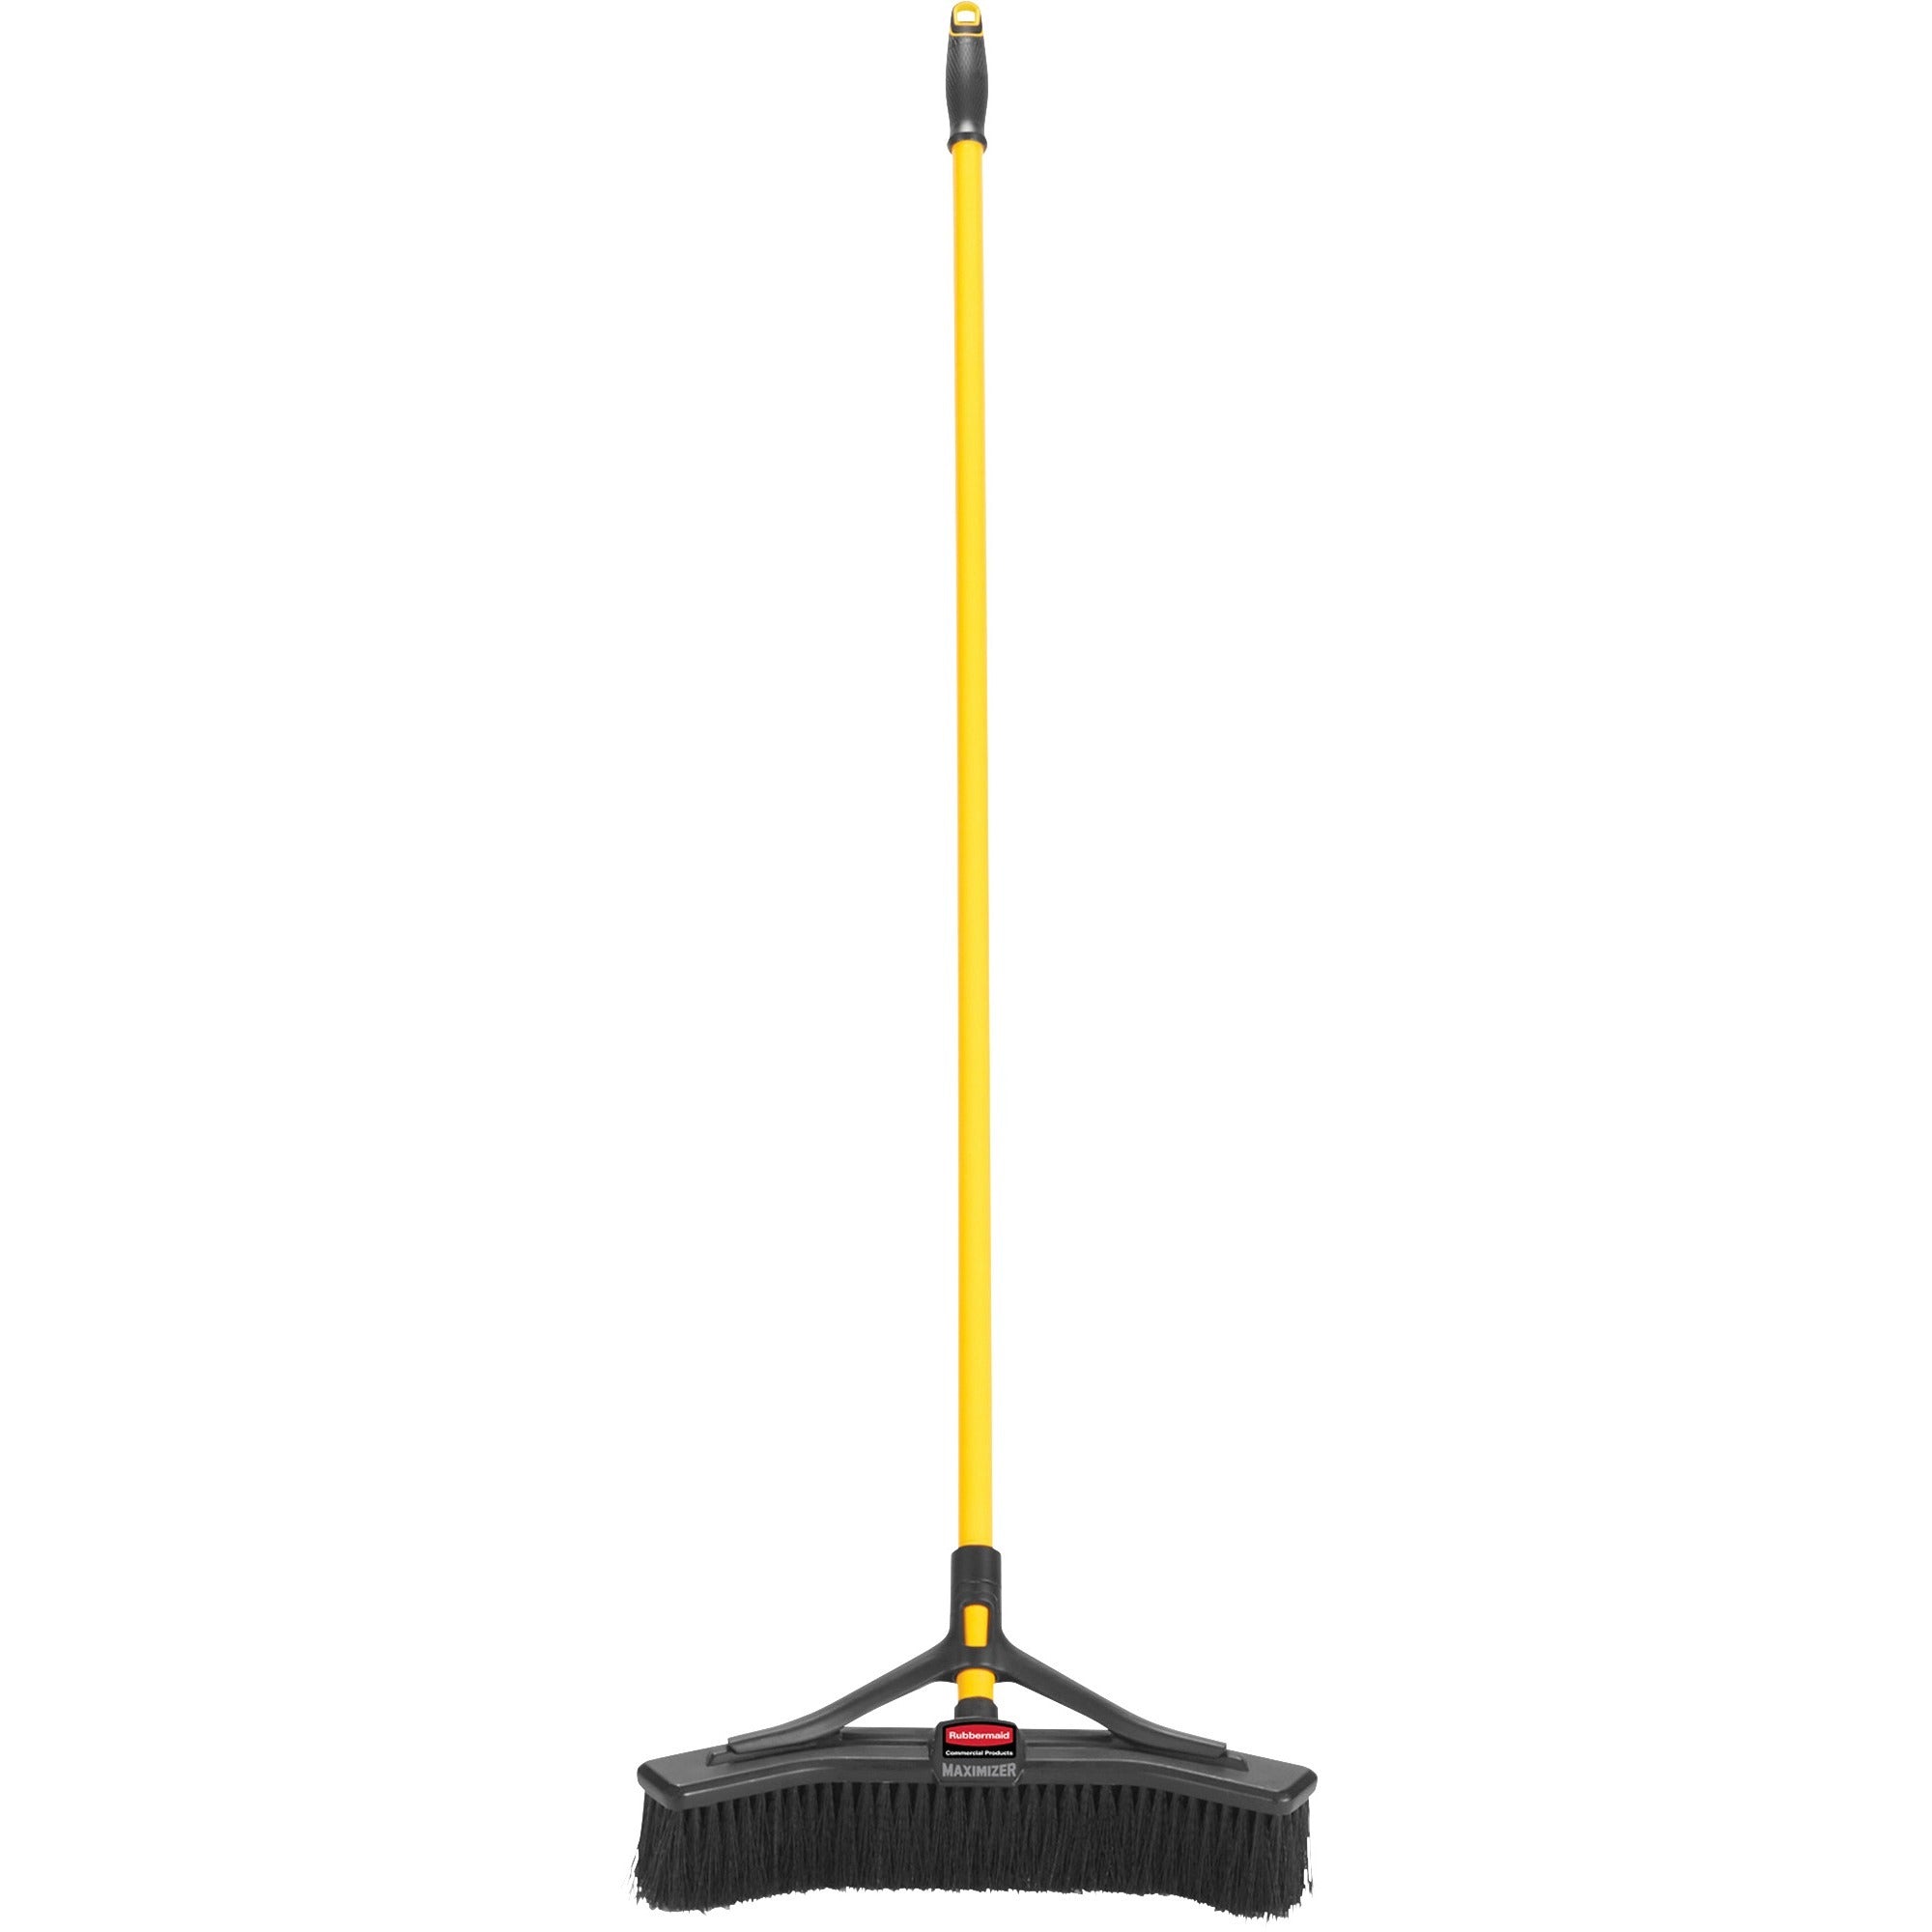 rubbermaid-commercial-maximizer-push-to-center-18-brooms-polypropylene-bristle-581-overall-length-steel-handle-6-carton_rcp2018727ct - 2